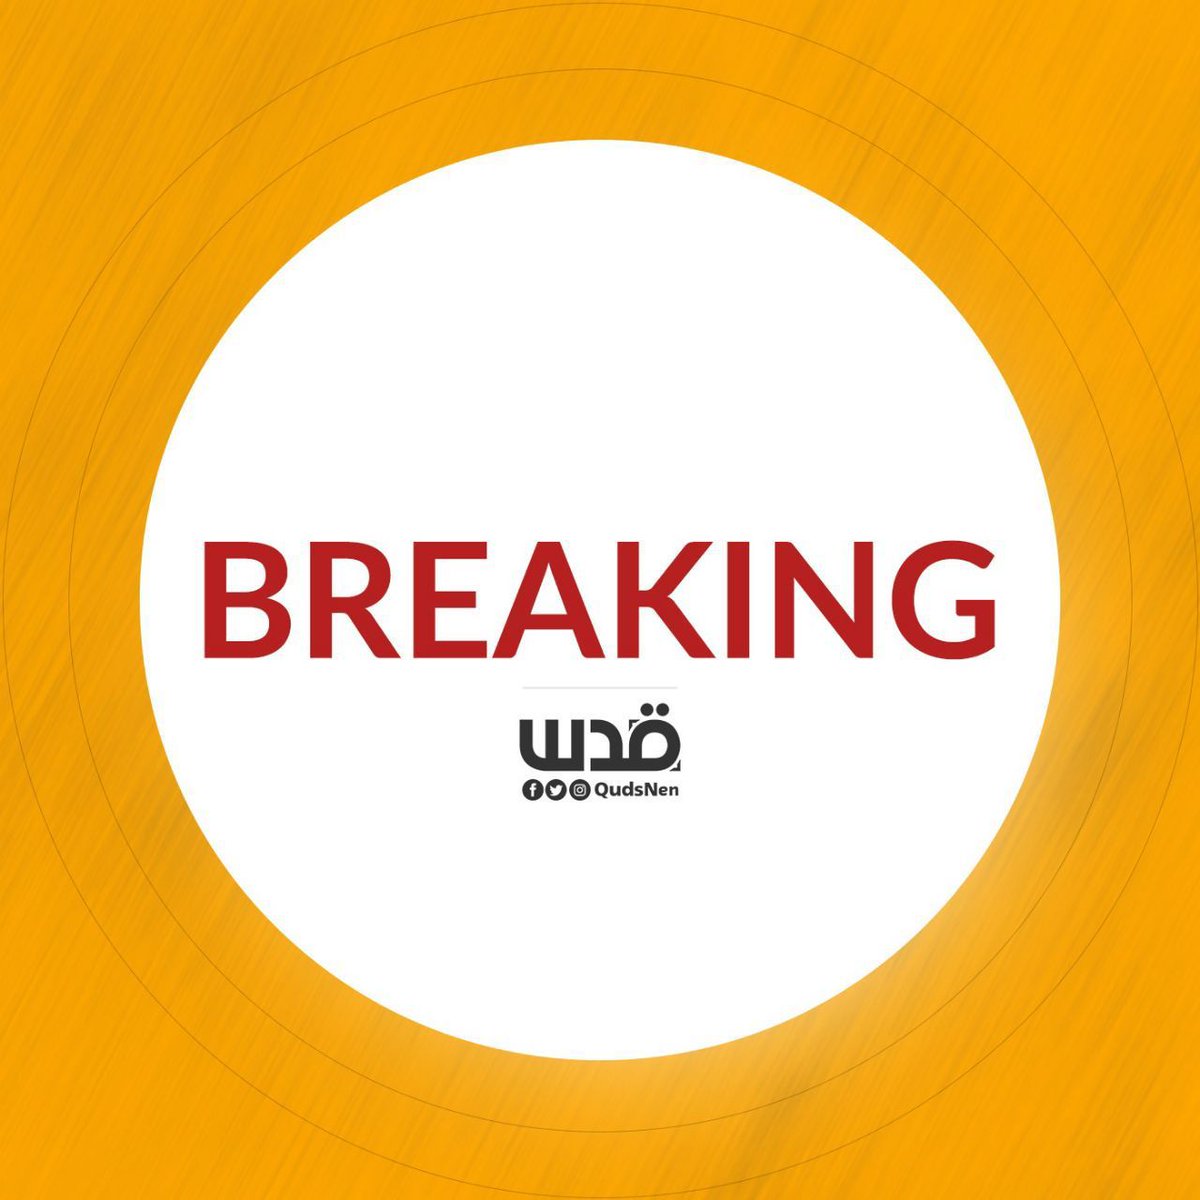 BREAKING| Al Mayadeen reports that journalists from Al Hudaydah Radio are among casualties resulted from an American-British aggression on the radio building in Al Hudaydah in Yemen.